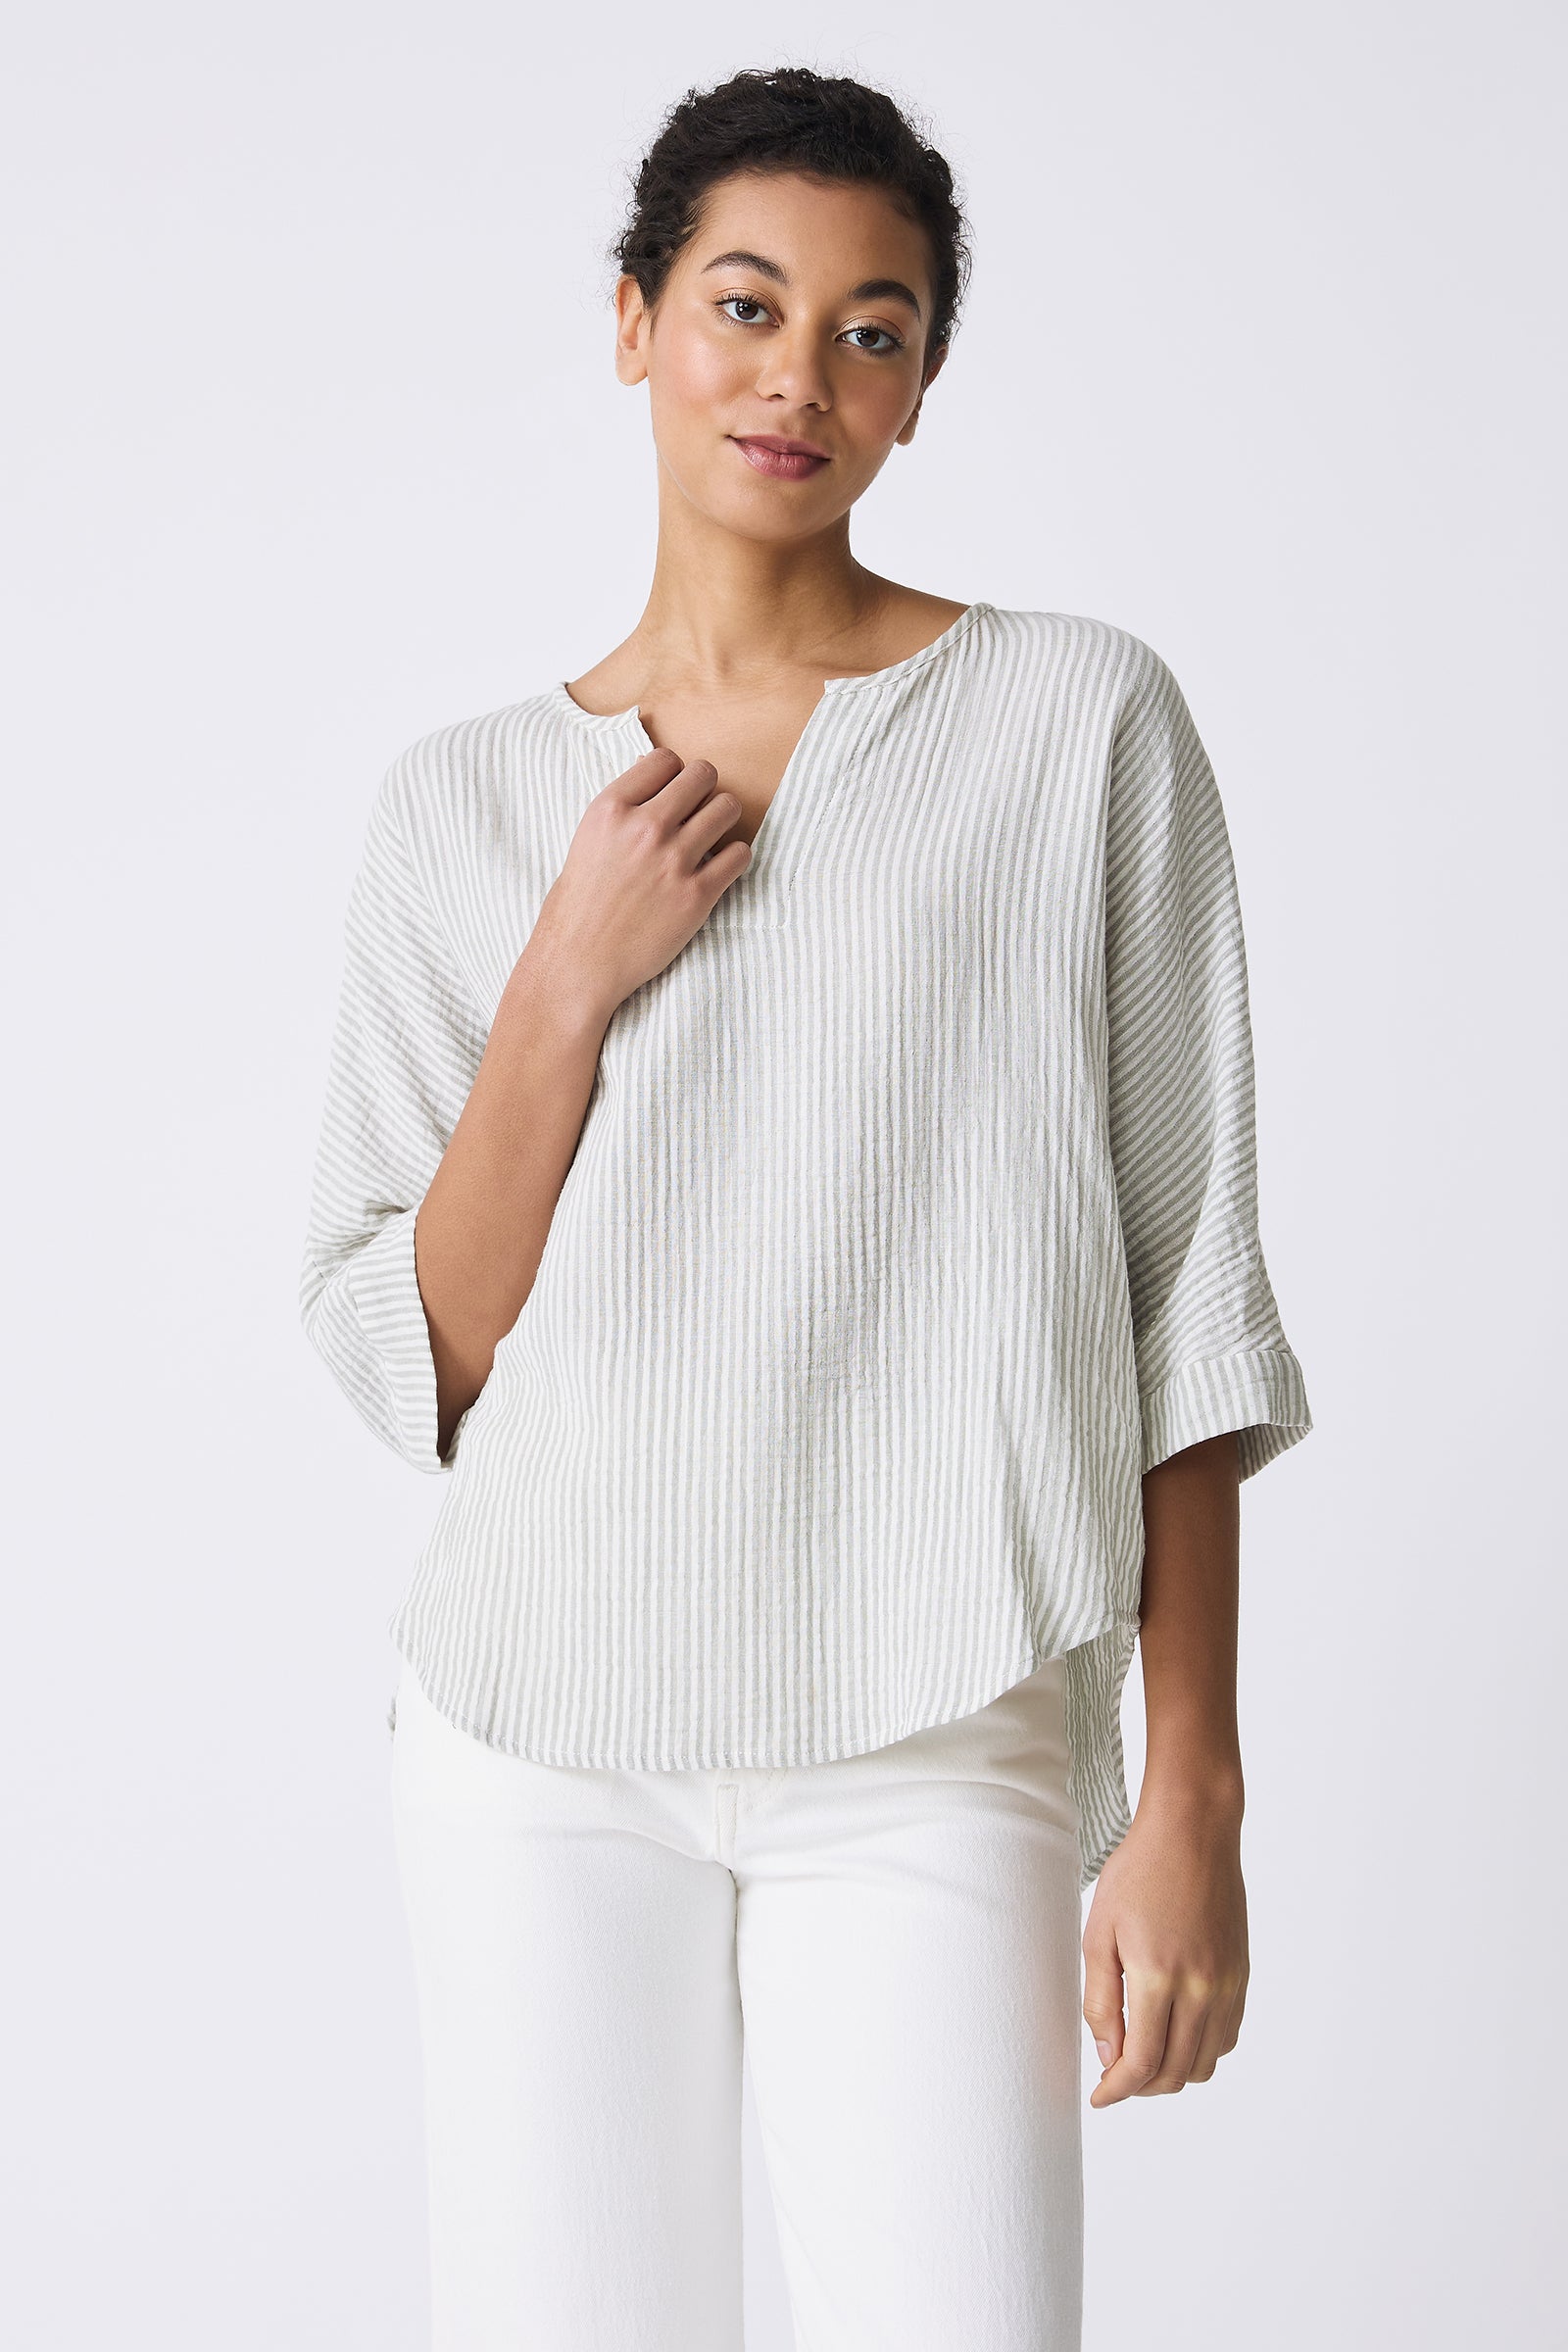 Kal Rieman Nora Notch Front Top in Sage Stripe on model touching shirt front view